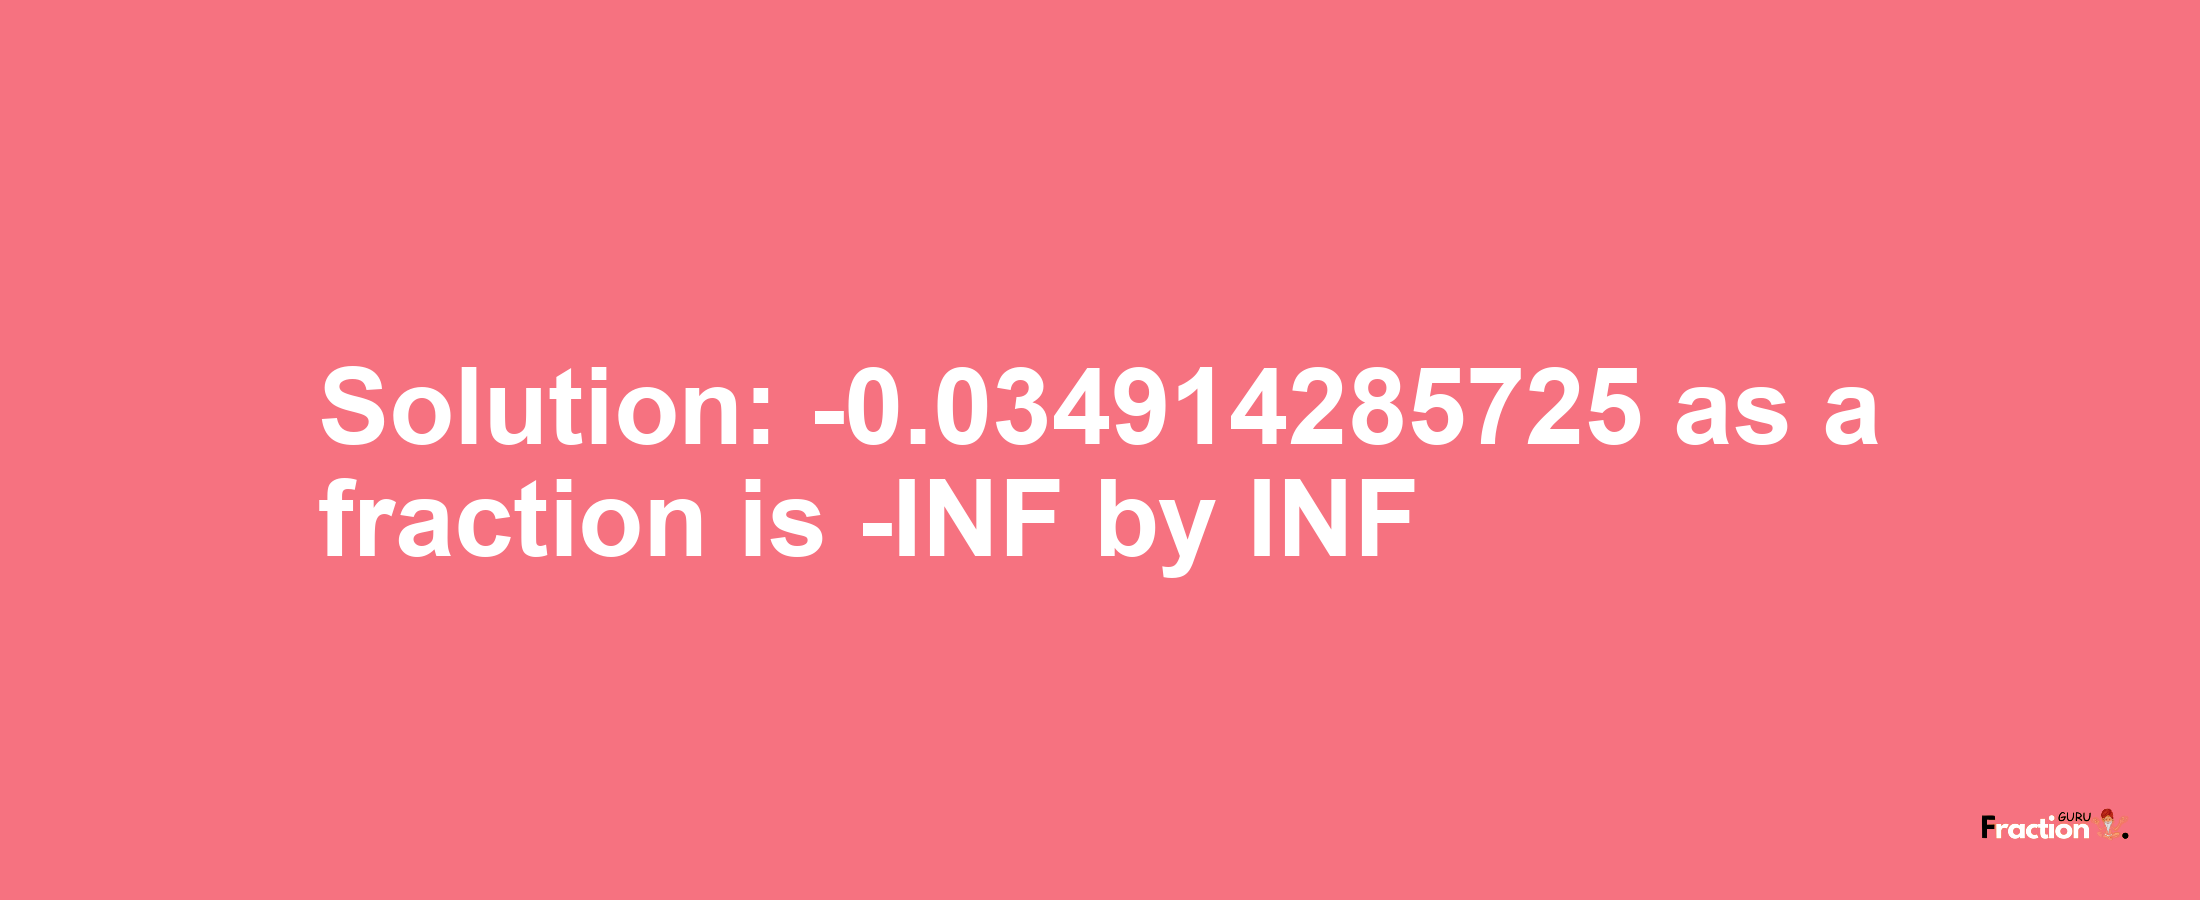 Solution:-0.034914285725 as a fraction is -INF/INF